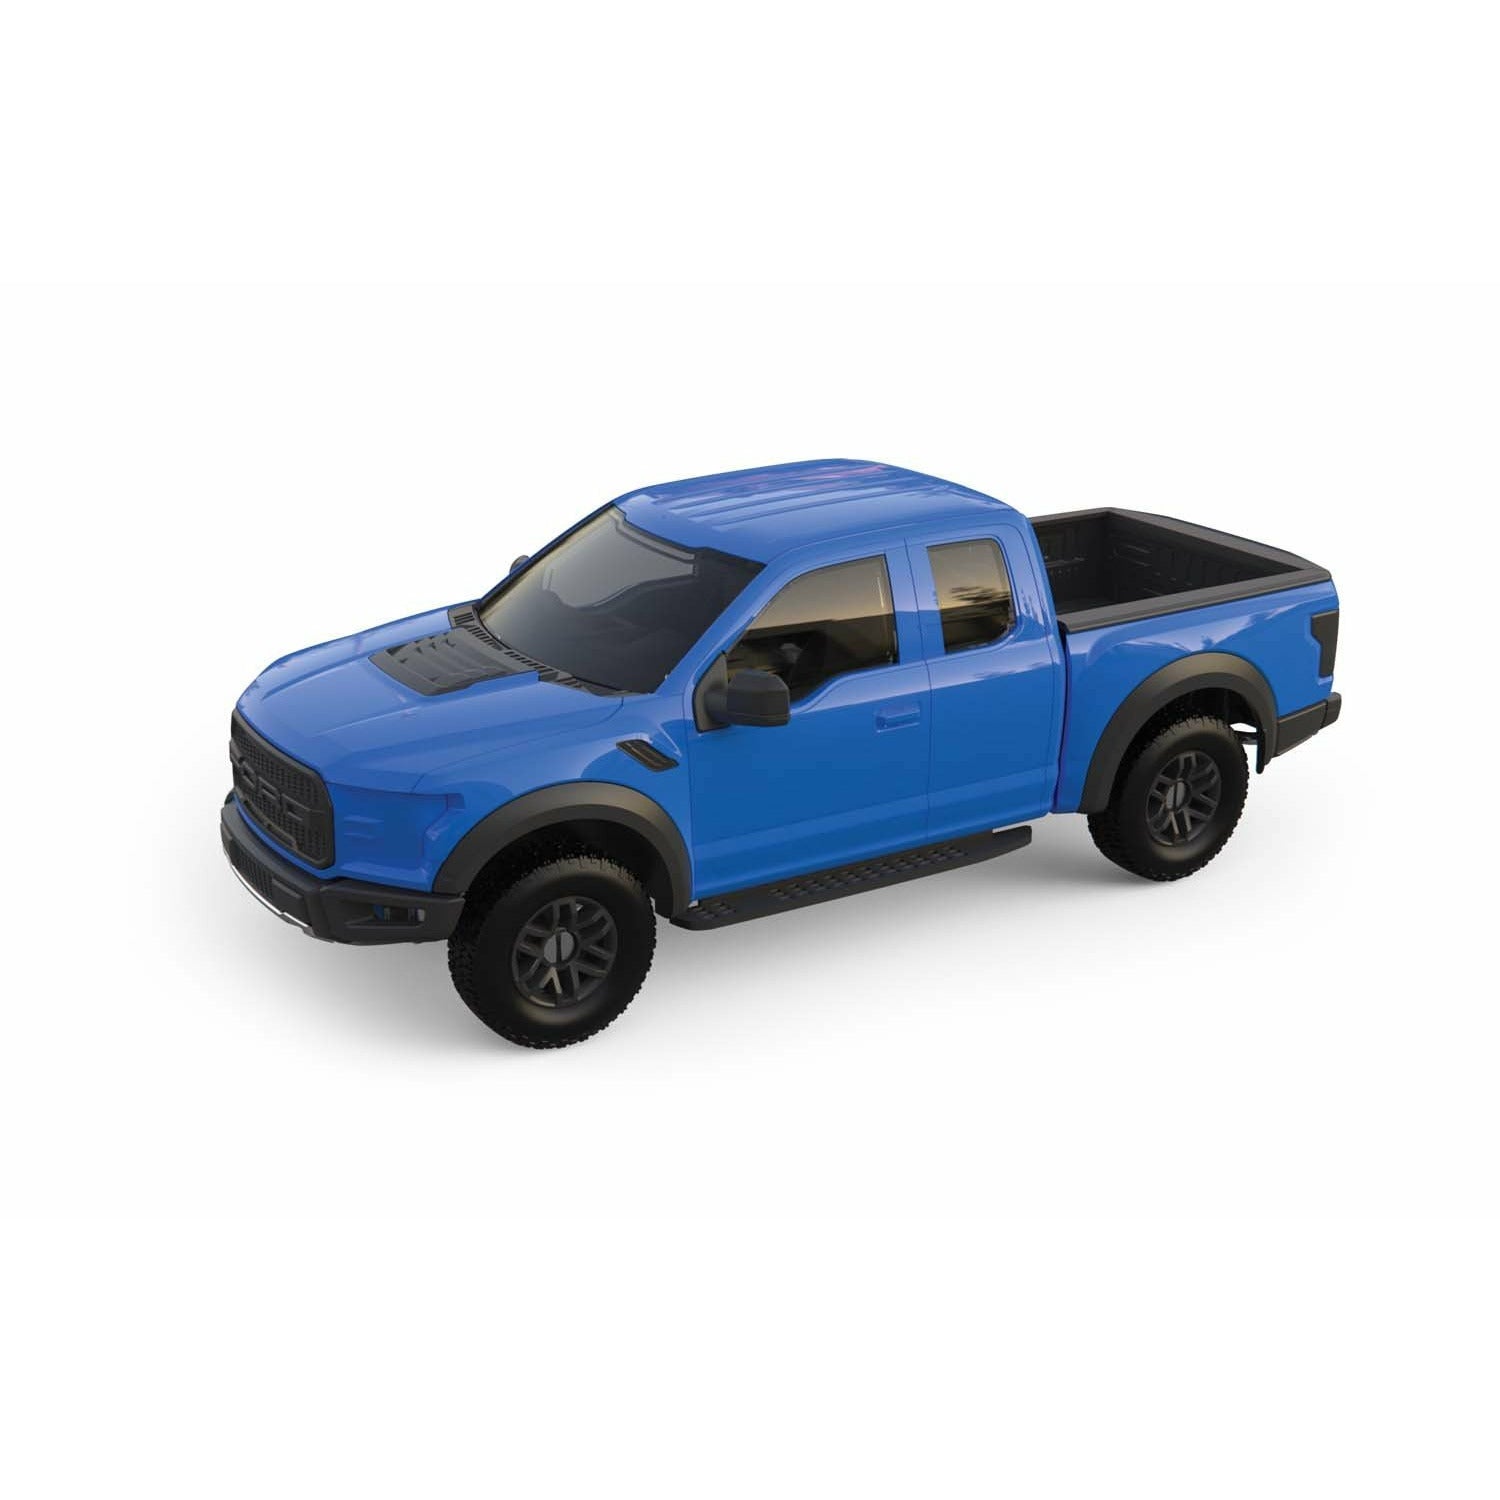 Ford F-150 Raptor 1/24 Quick Build Car Kit #J6037 by Airfix